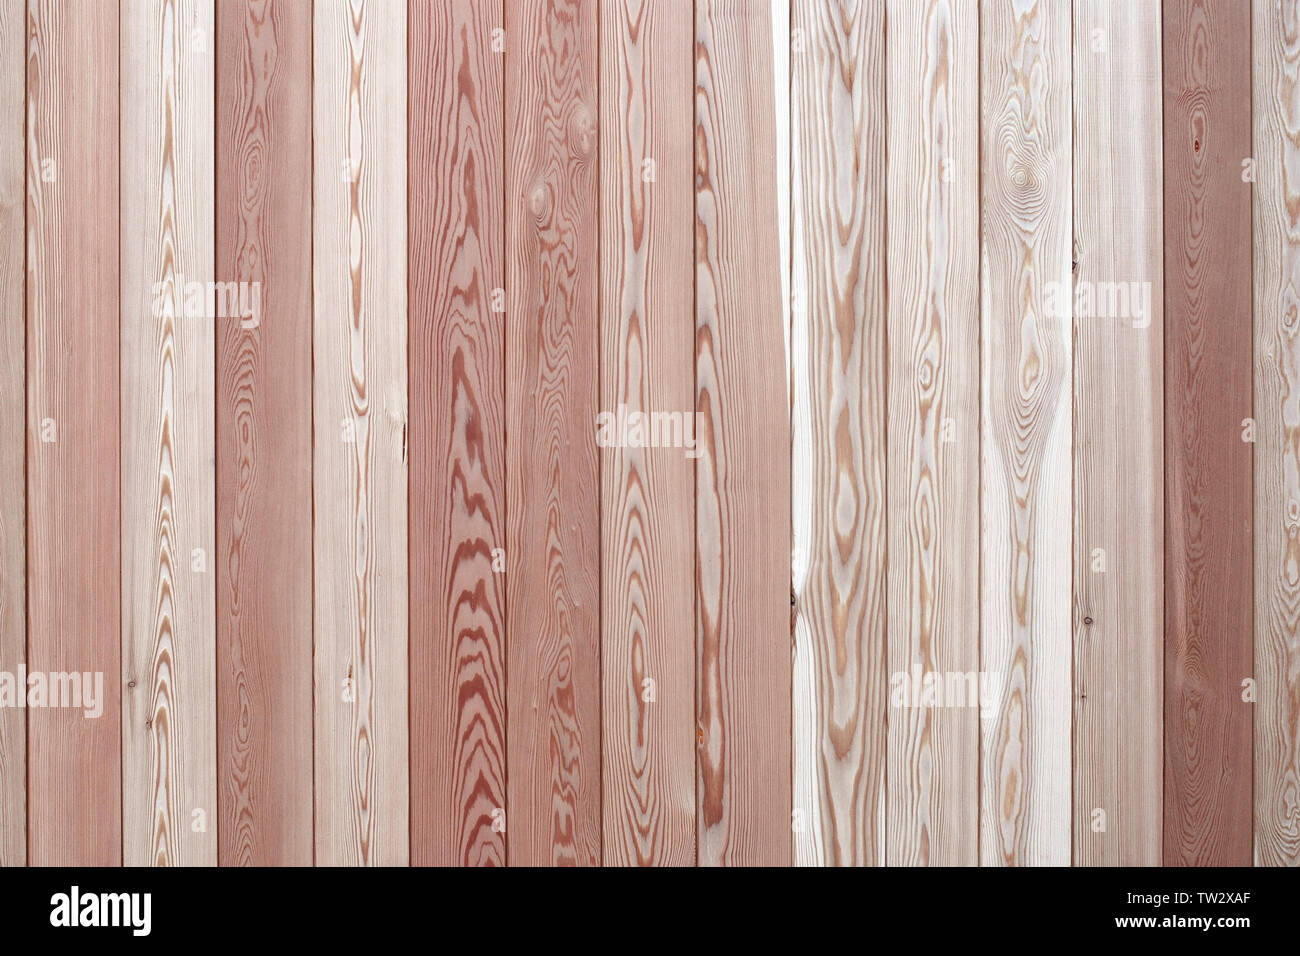 wooden boards with beautiful texture and  annual rings patterns, vertically arranged slats of various light to dark natural shades of wood Stock Photo